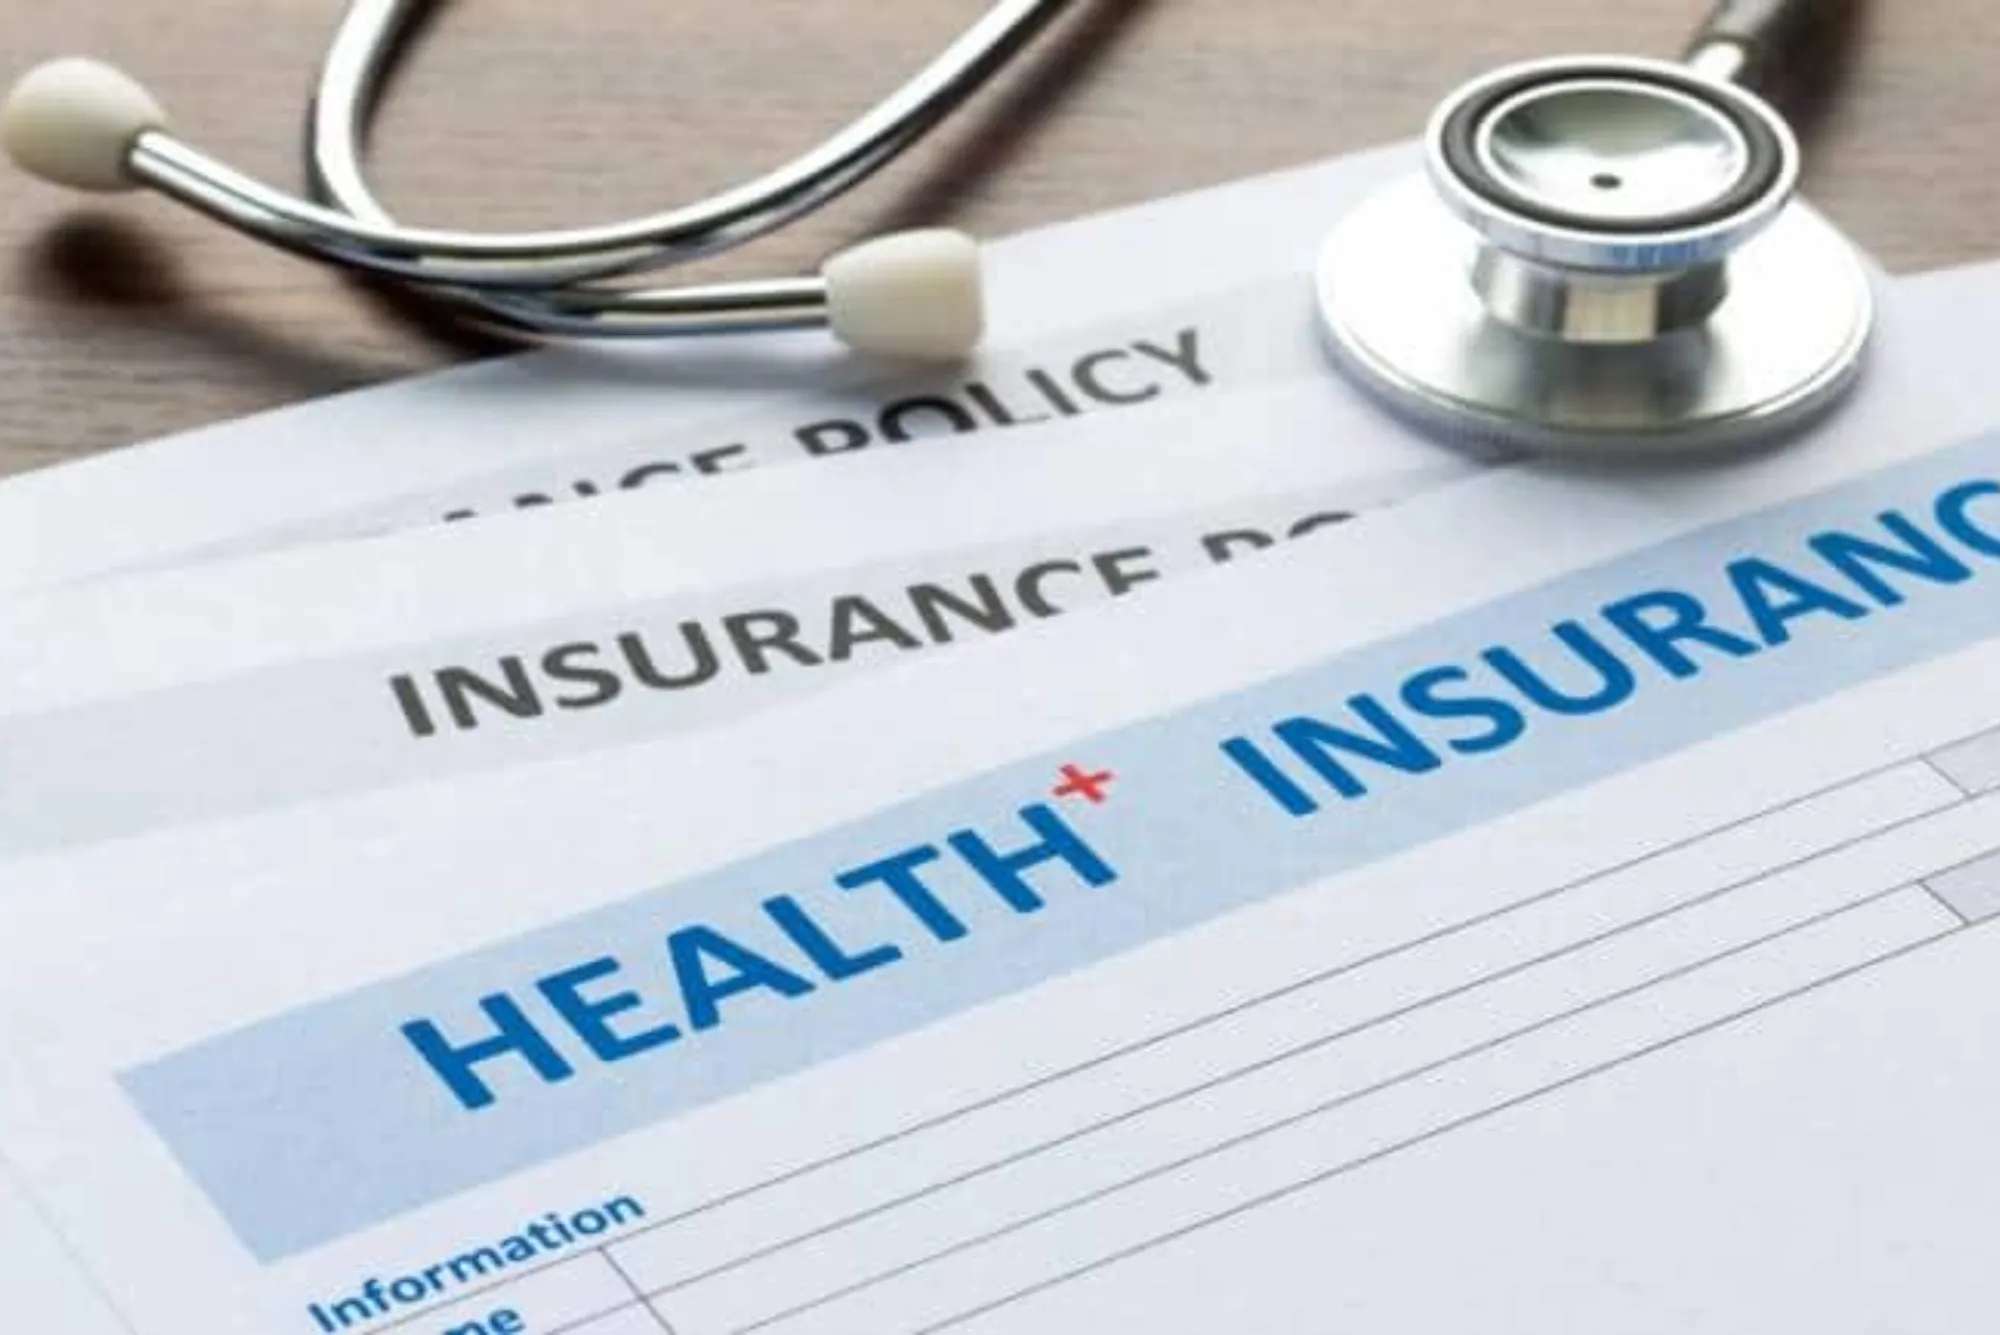 How to Obtain Health Insurance License